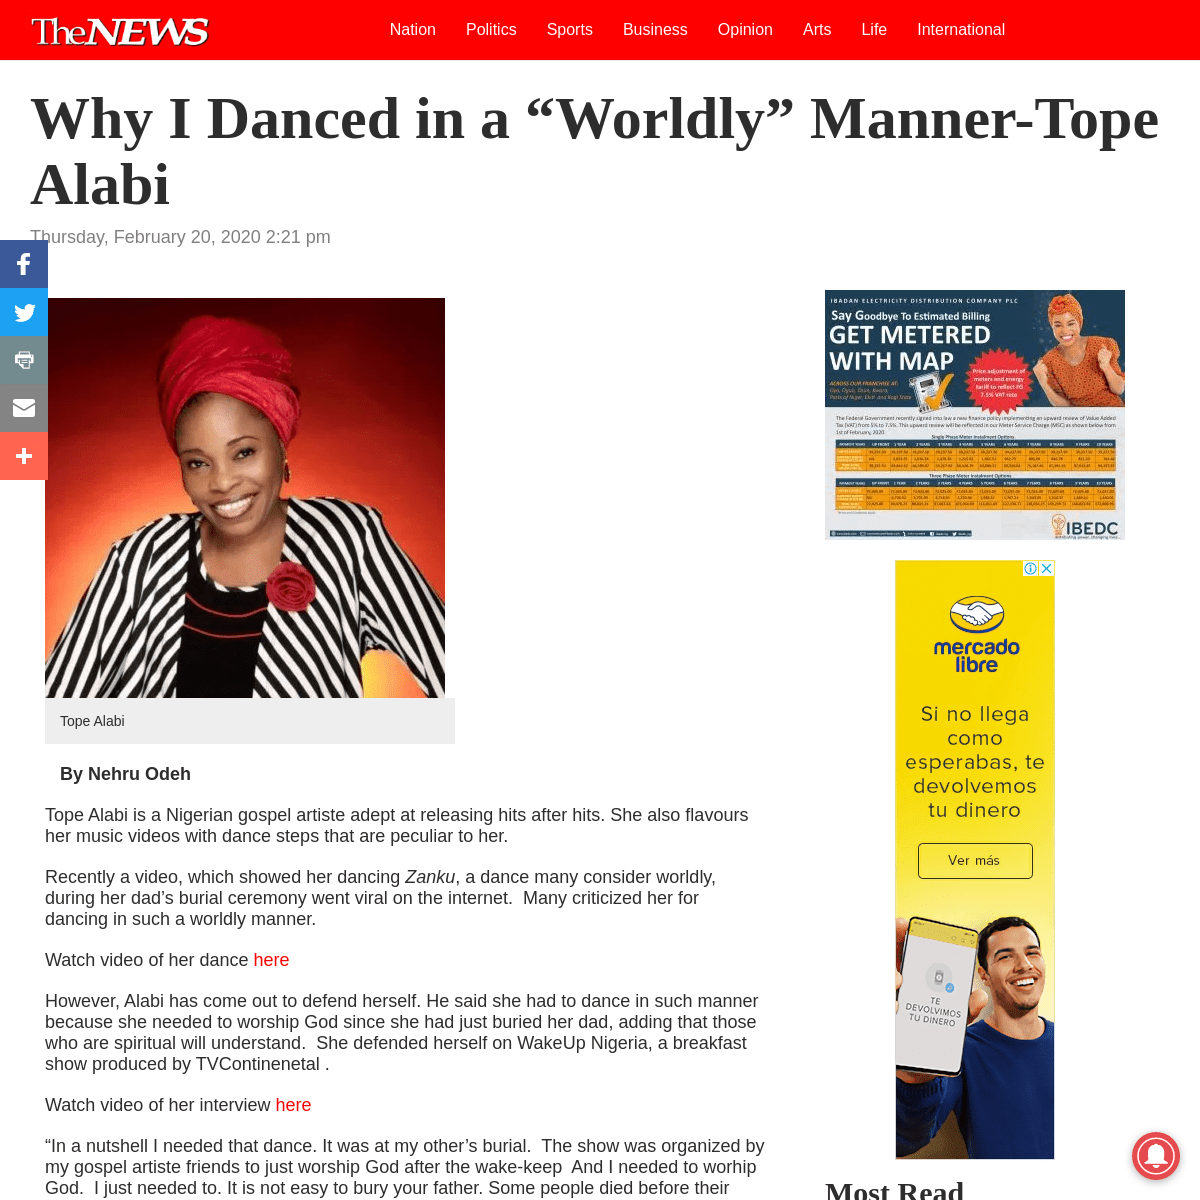 A complete backup of www.thenewsnigeria.com.ng/2020/02/20/why-i-danced-in-a-worldly-manner-tope-alabi/